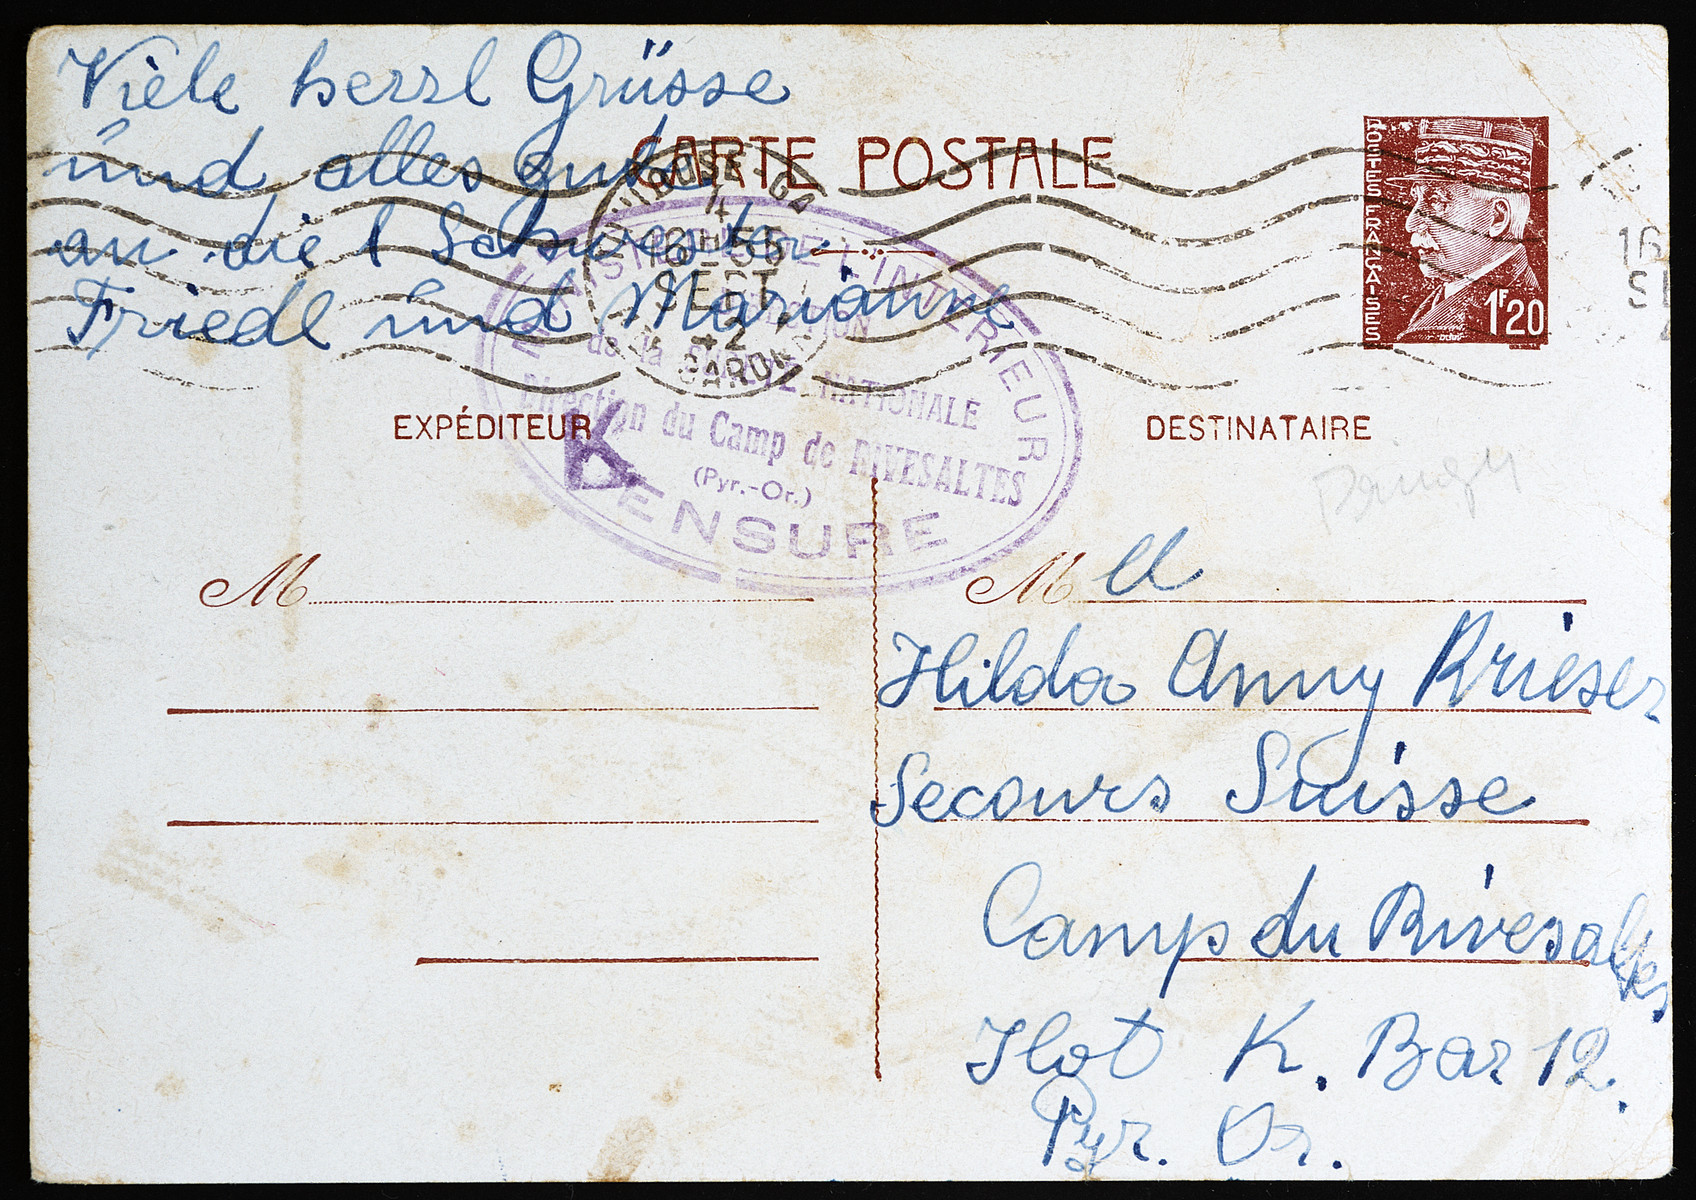 Postcard send from Perla Krieser from a deportation train to her two daughters in the Rivesaltes concentration camp.  This is her final communication with her family before she was killed in Auschwitz.

The text of the postcard reads:

"My dearest loved ones,

Now we have just gone directly over Toulouse.  It is 12 o'clock noon; unfortunately, we have no food to eat.  You all can imagine what I am thinking.  I am happy and satisfied that my loved ones are not here.  I am curious when you will leave.  In God's name, be brave and calm and [thanking] your loving sister Friedl's heart.  

Yours,
Mama

Many best wishes and hope everything is good from yours loving sisters Freidl and Marianne."